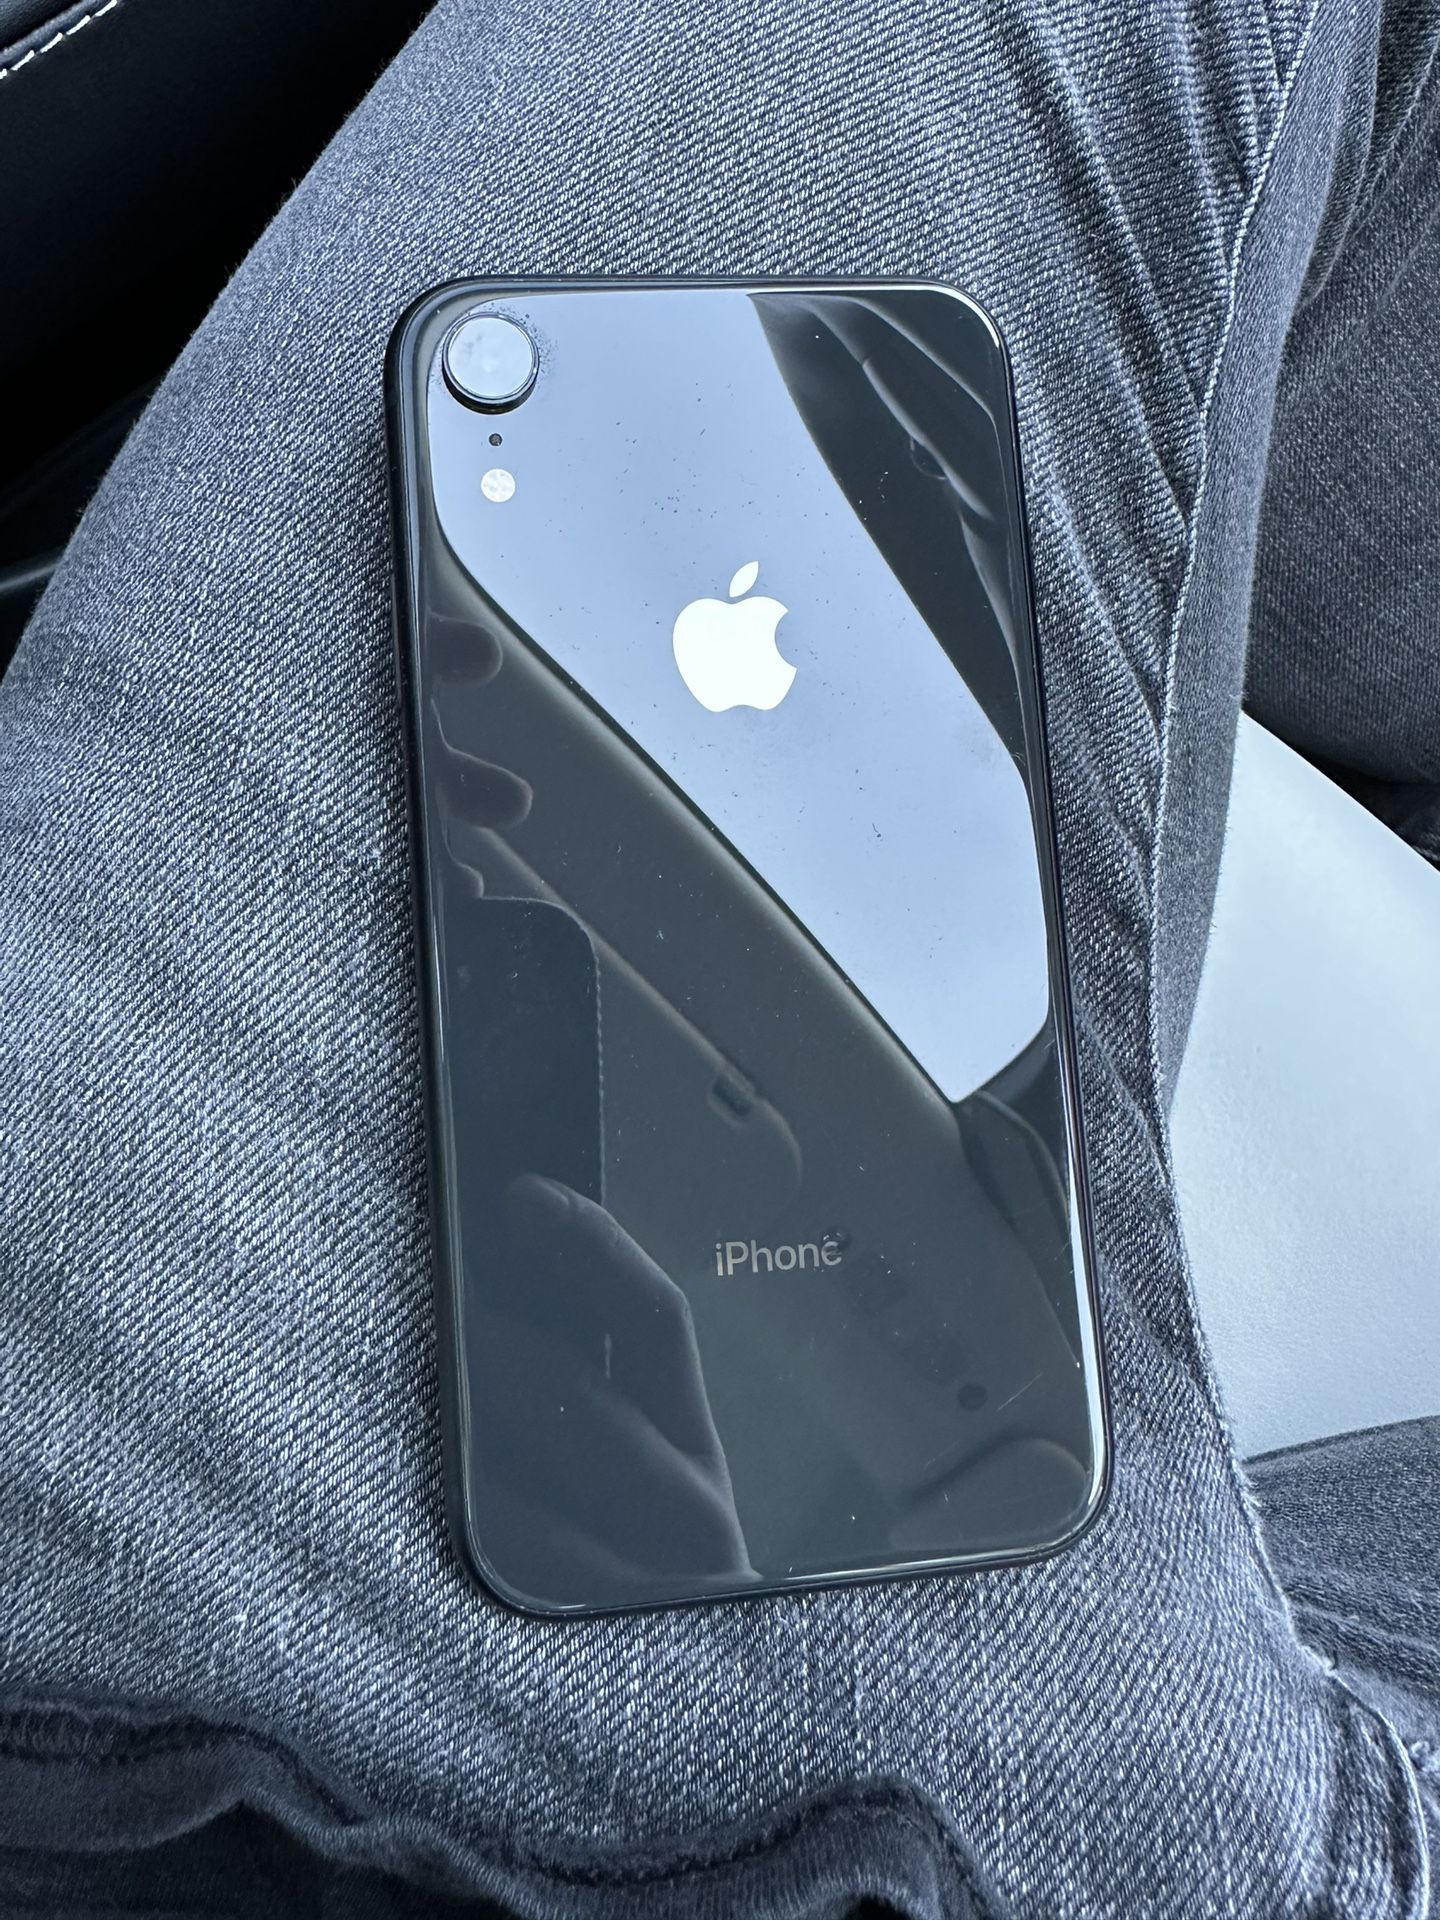 iPhone XR works For AT&T